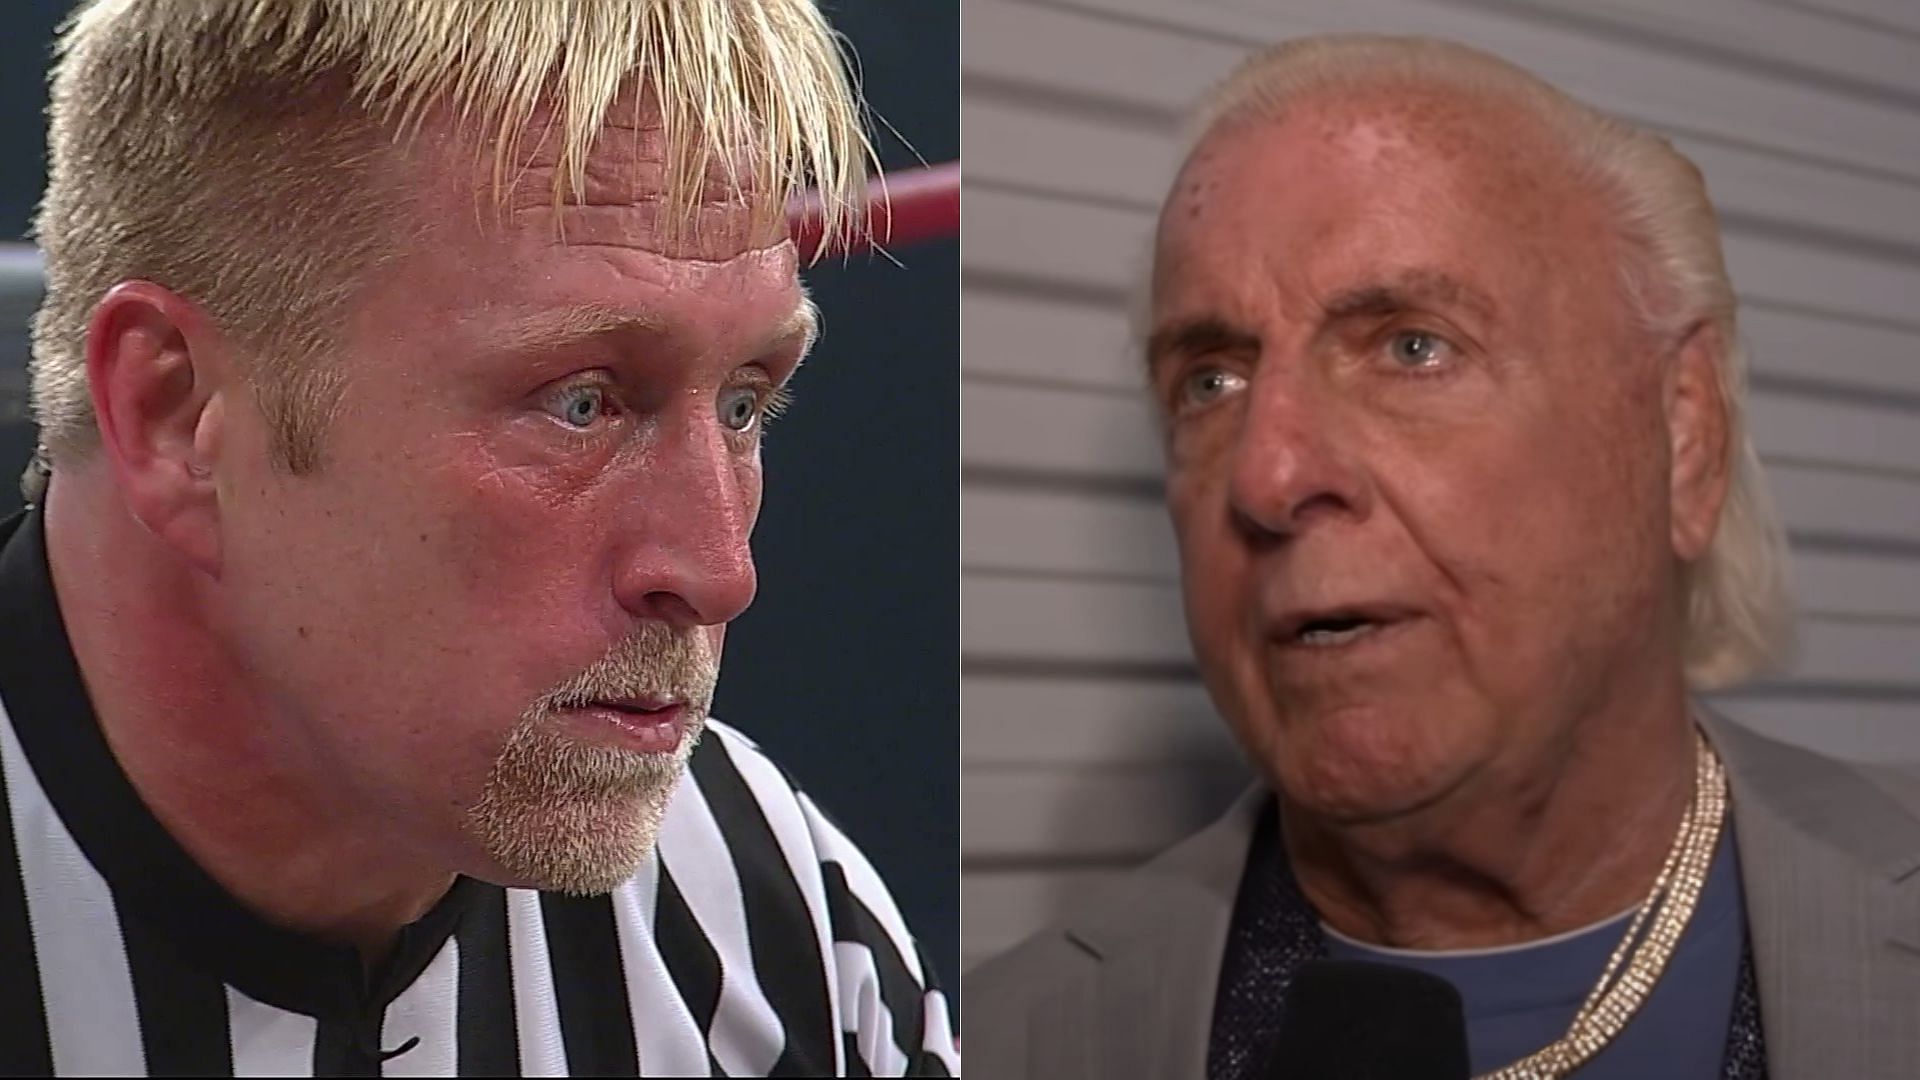 Shane Sewell (left); Ric Flair (right)